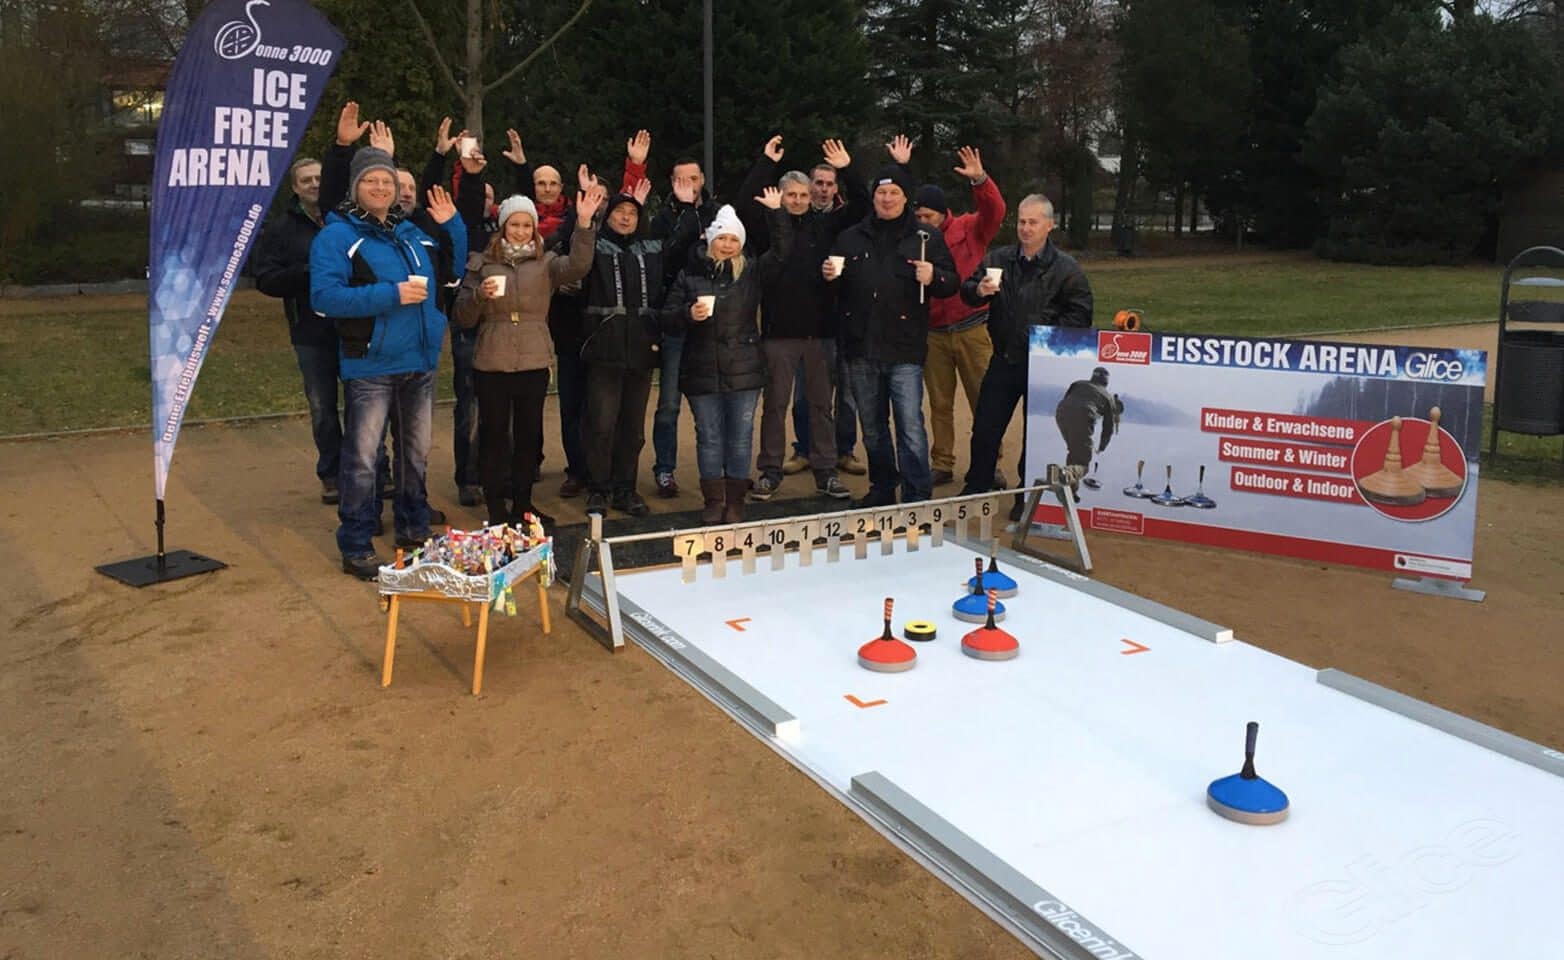 Employees enjoying Eisstock game on synthetic track at company event